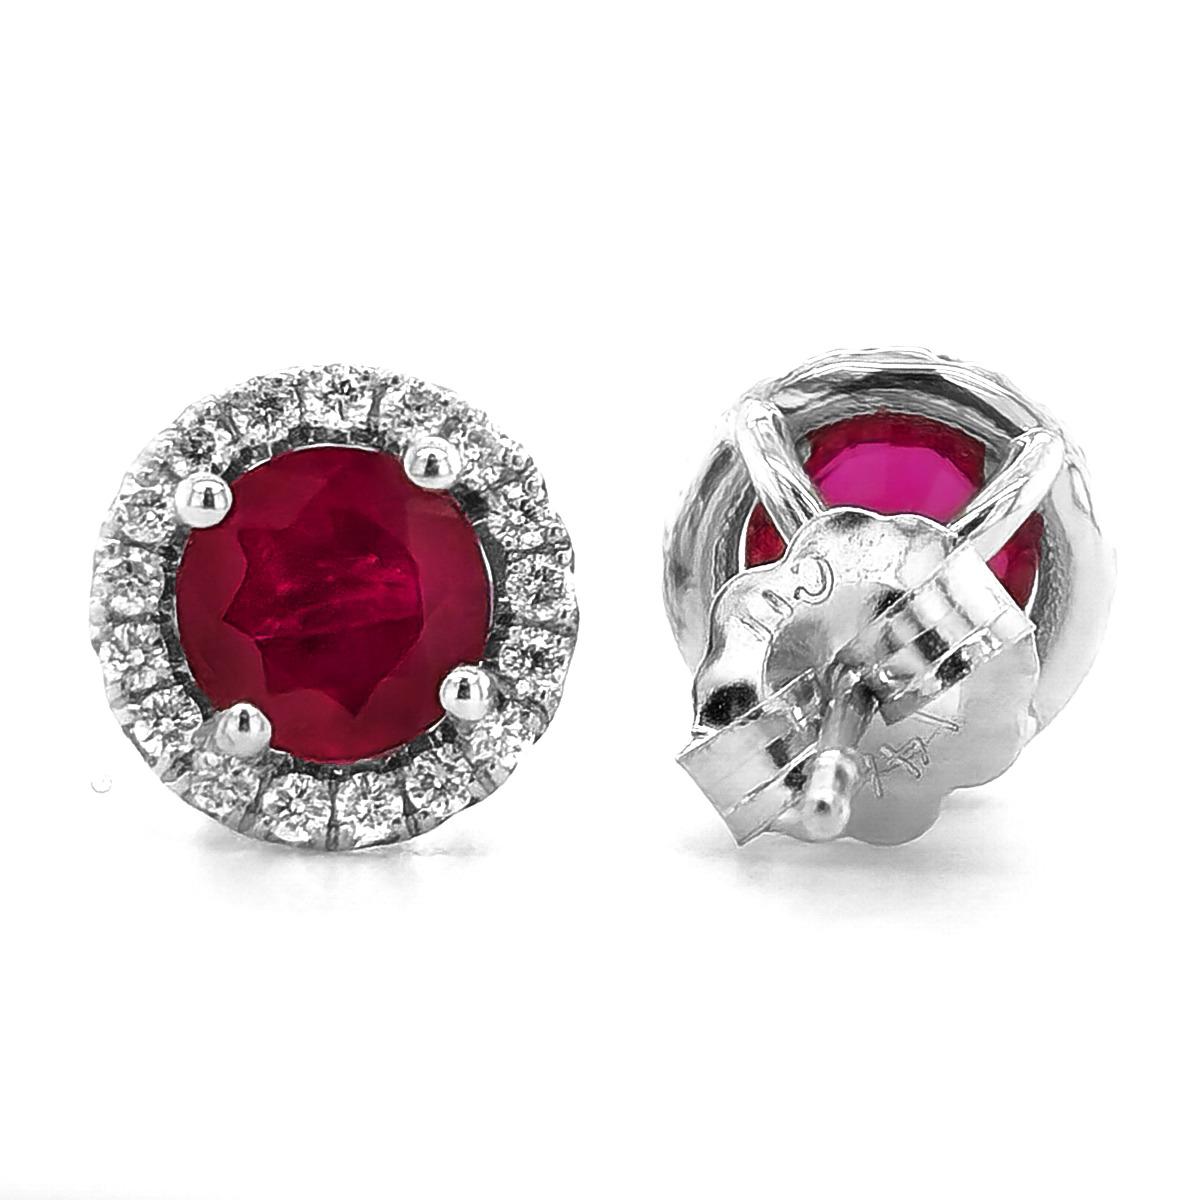 Redefine elegance with these stunning 14K white gold stud earrings, finely crafted in a rich shine. Round cut natural rubies secured in classic four-prong settings nestle in the center, displaying a rich red. Sparkling round brilliant cut diamonds